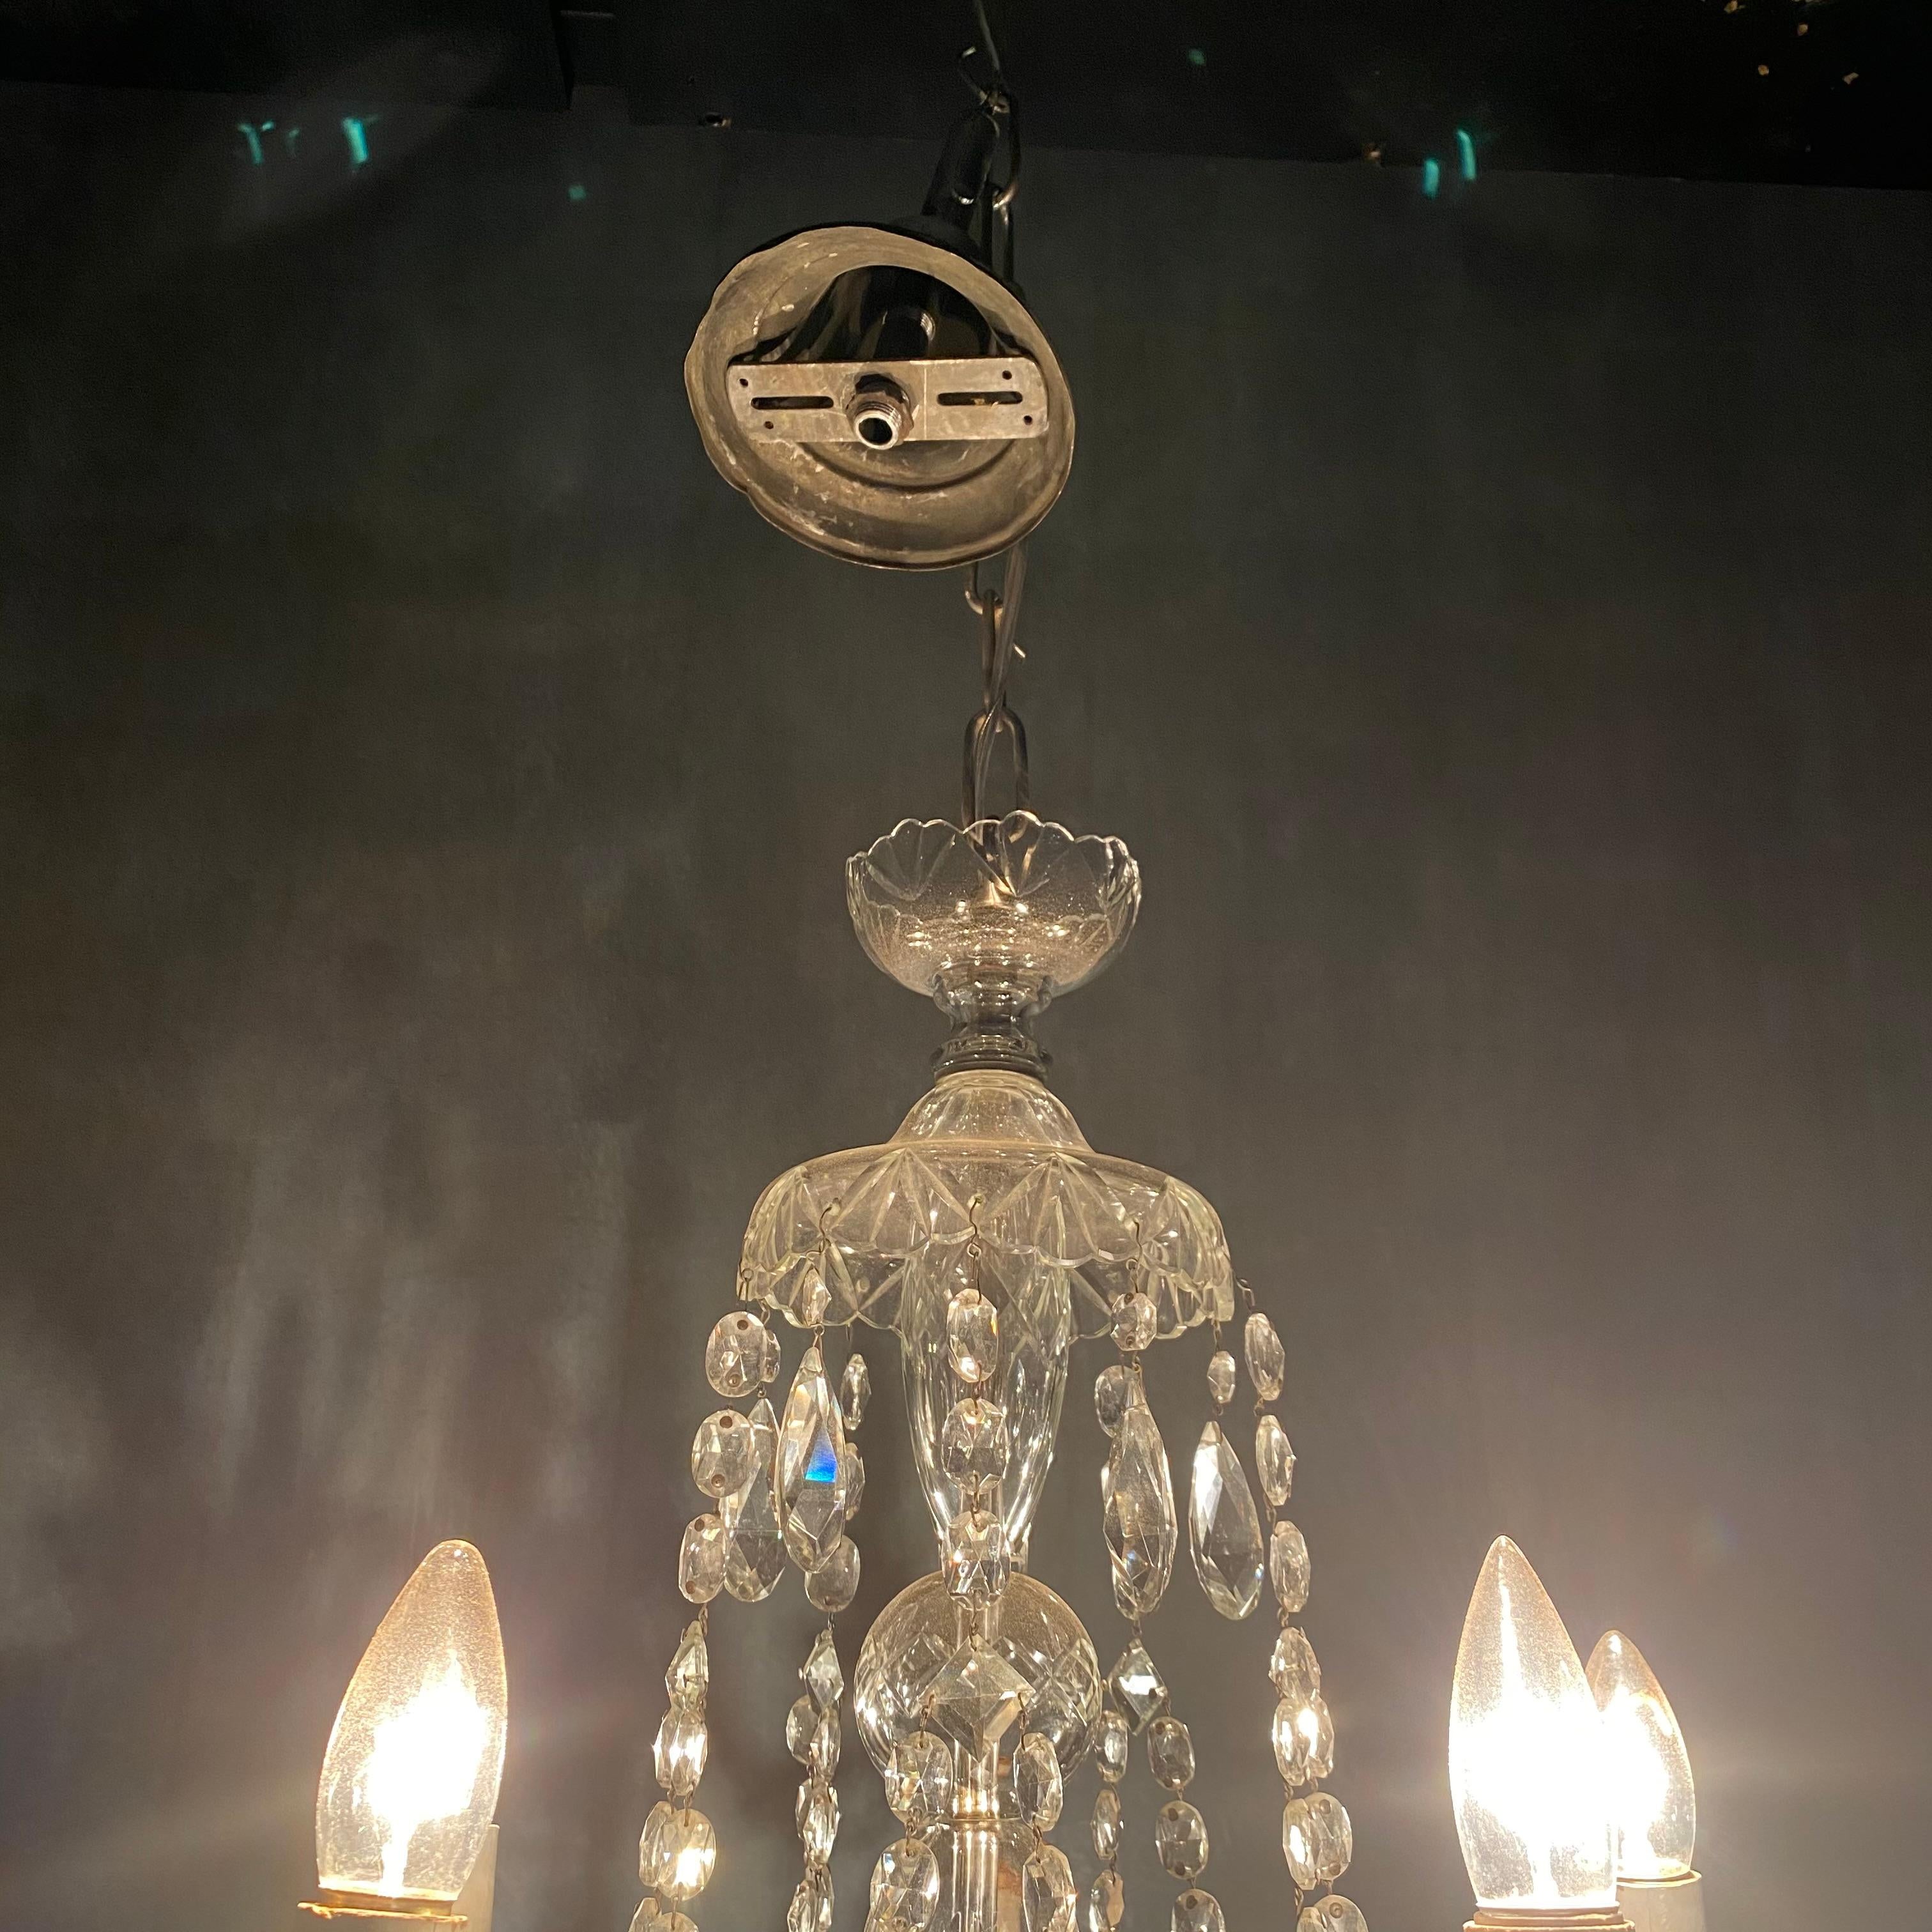 A nice simple chandelier with impressive 5 arm configuration and swooping glass crystal details .
 This piece was acquired from a private collection in Toronto nix purchased in Chicago, in the 70's;

Rewired tested and functional.